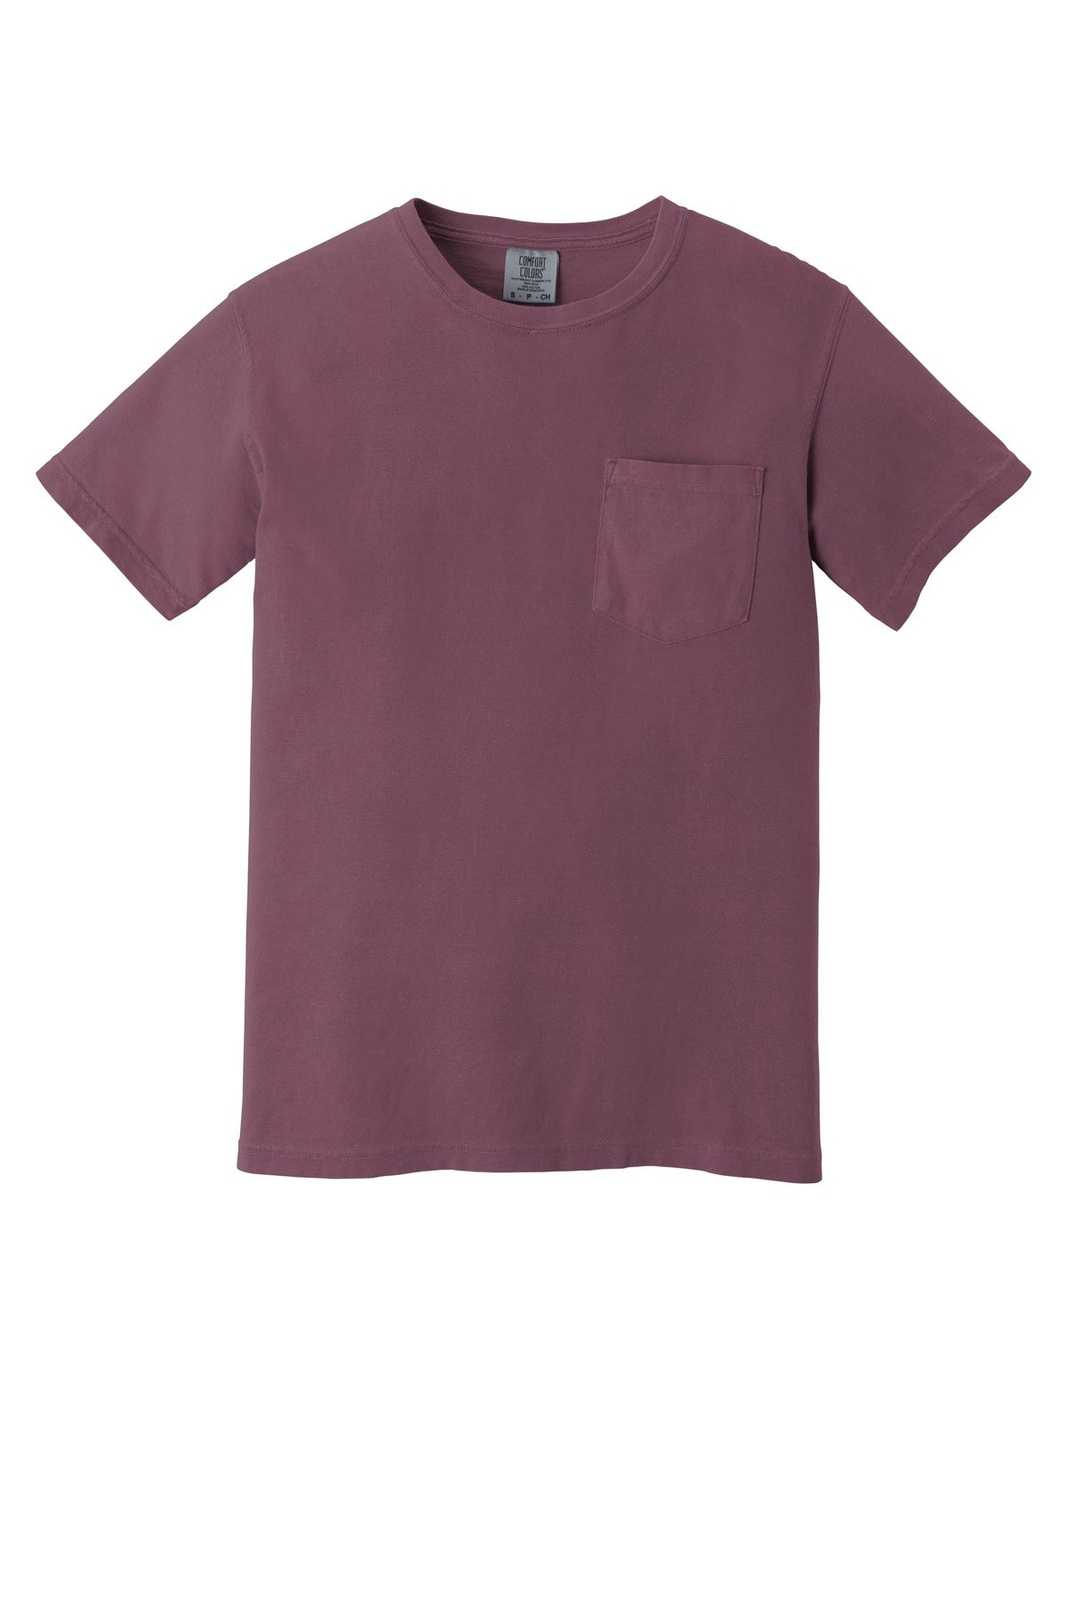 Comfort Colors 6030 Heavyweight Ring Spun Pocket Tee - Berry - HIT a Double